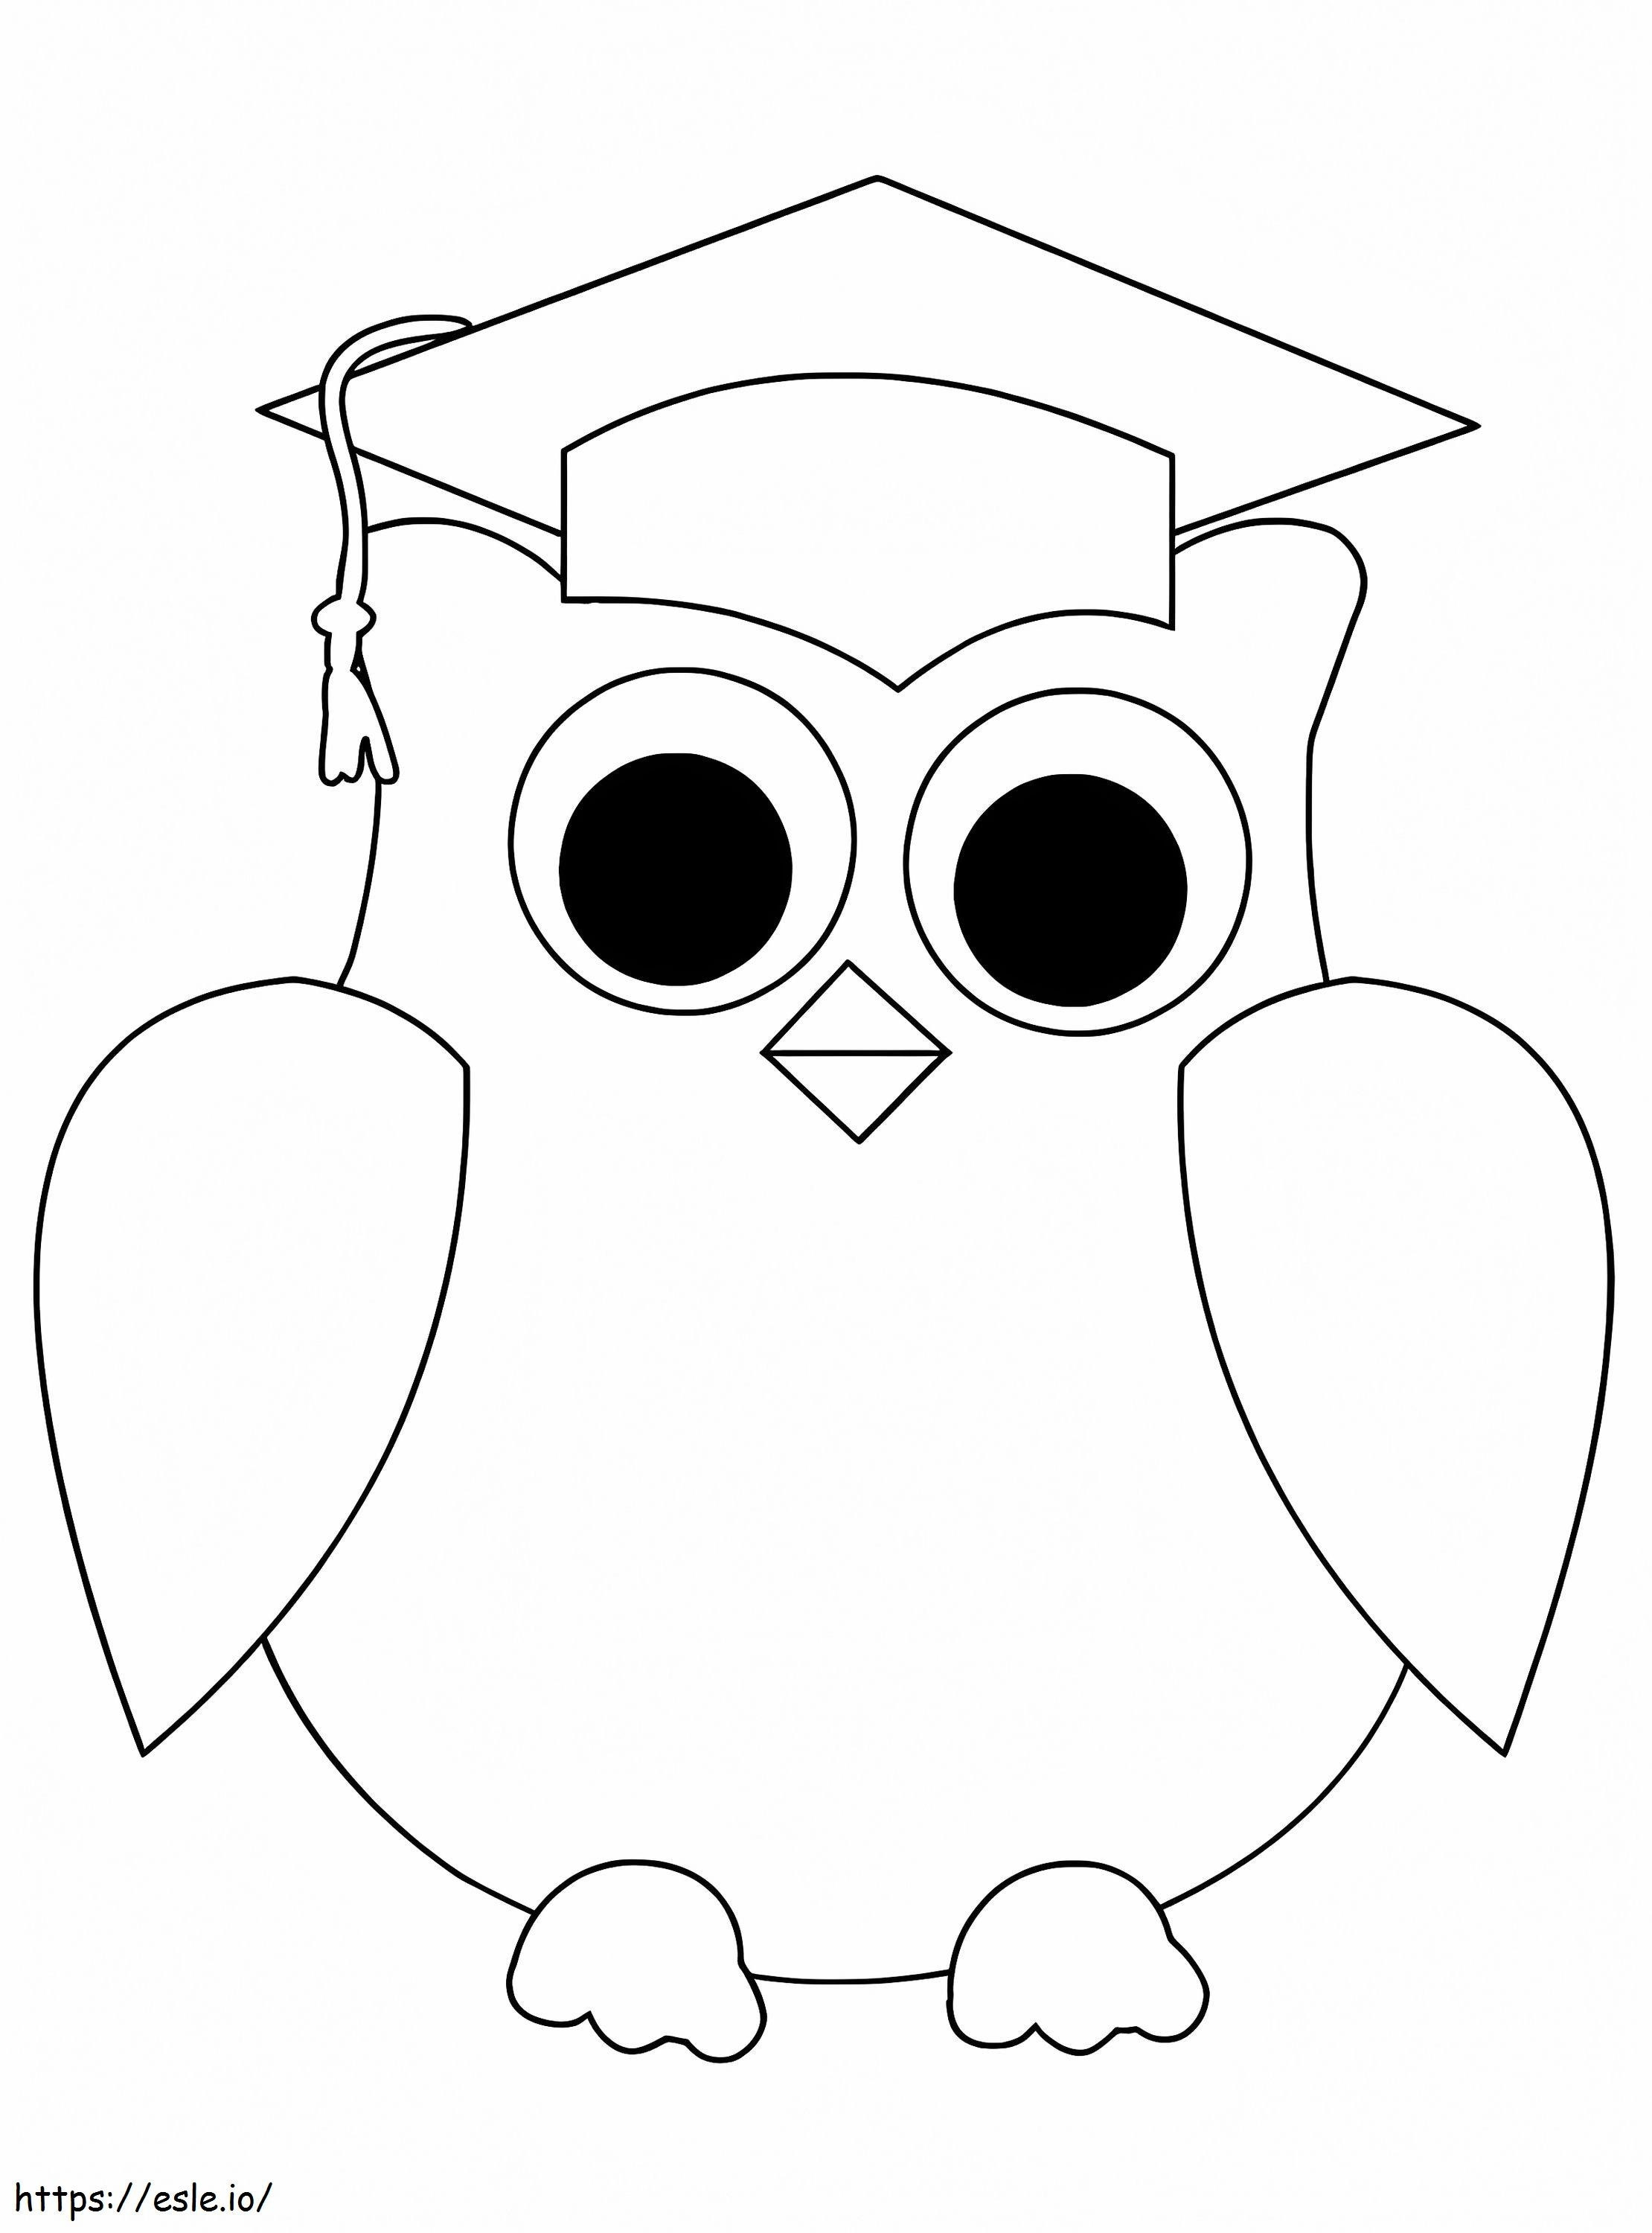 Easy Graduation Owl coloring page